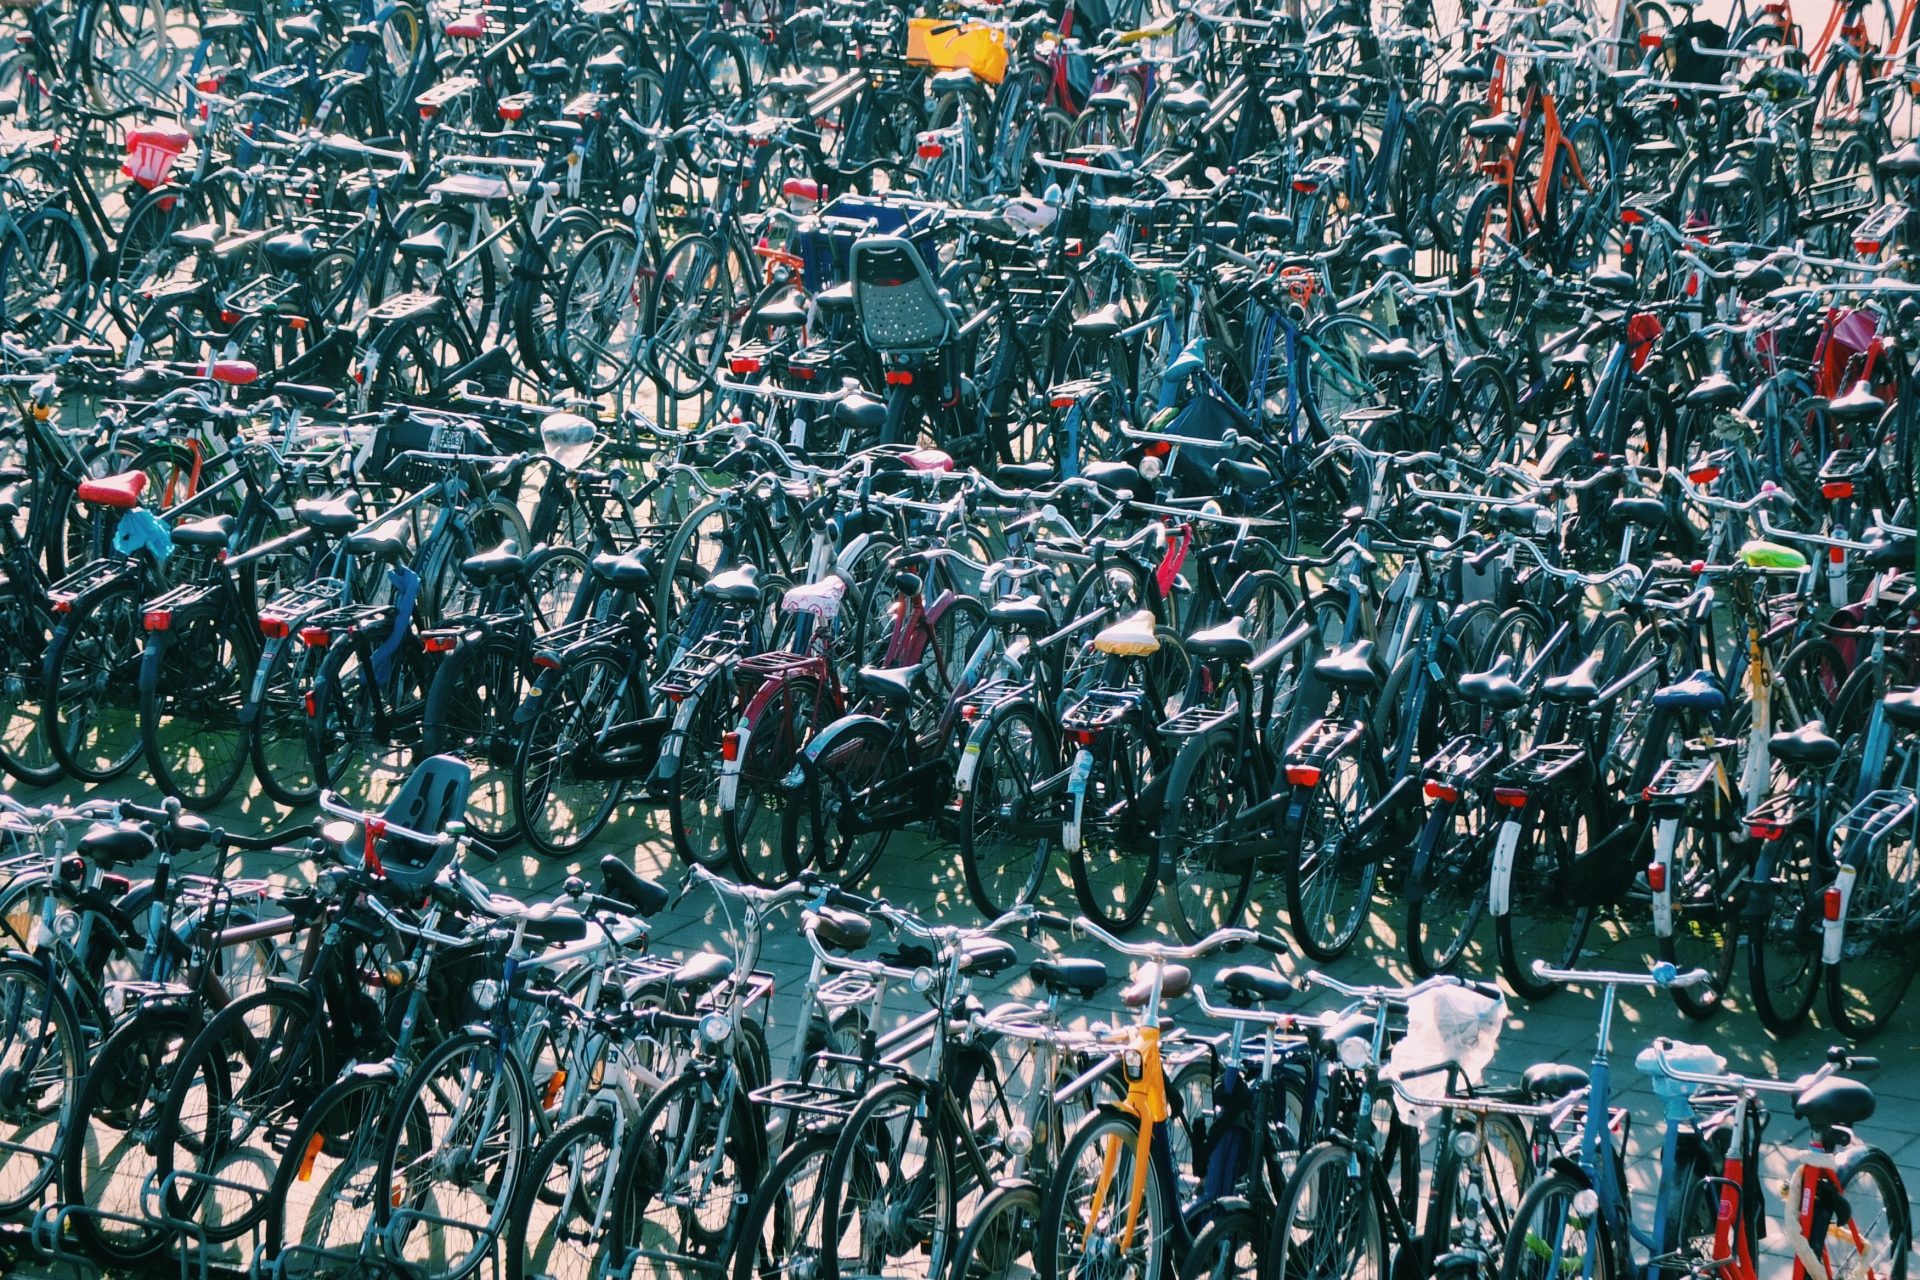 More bicycles than people